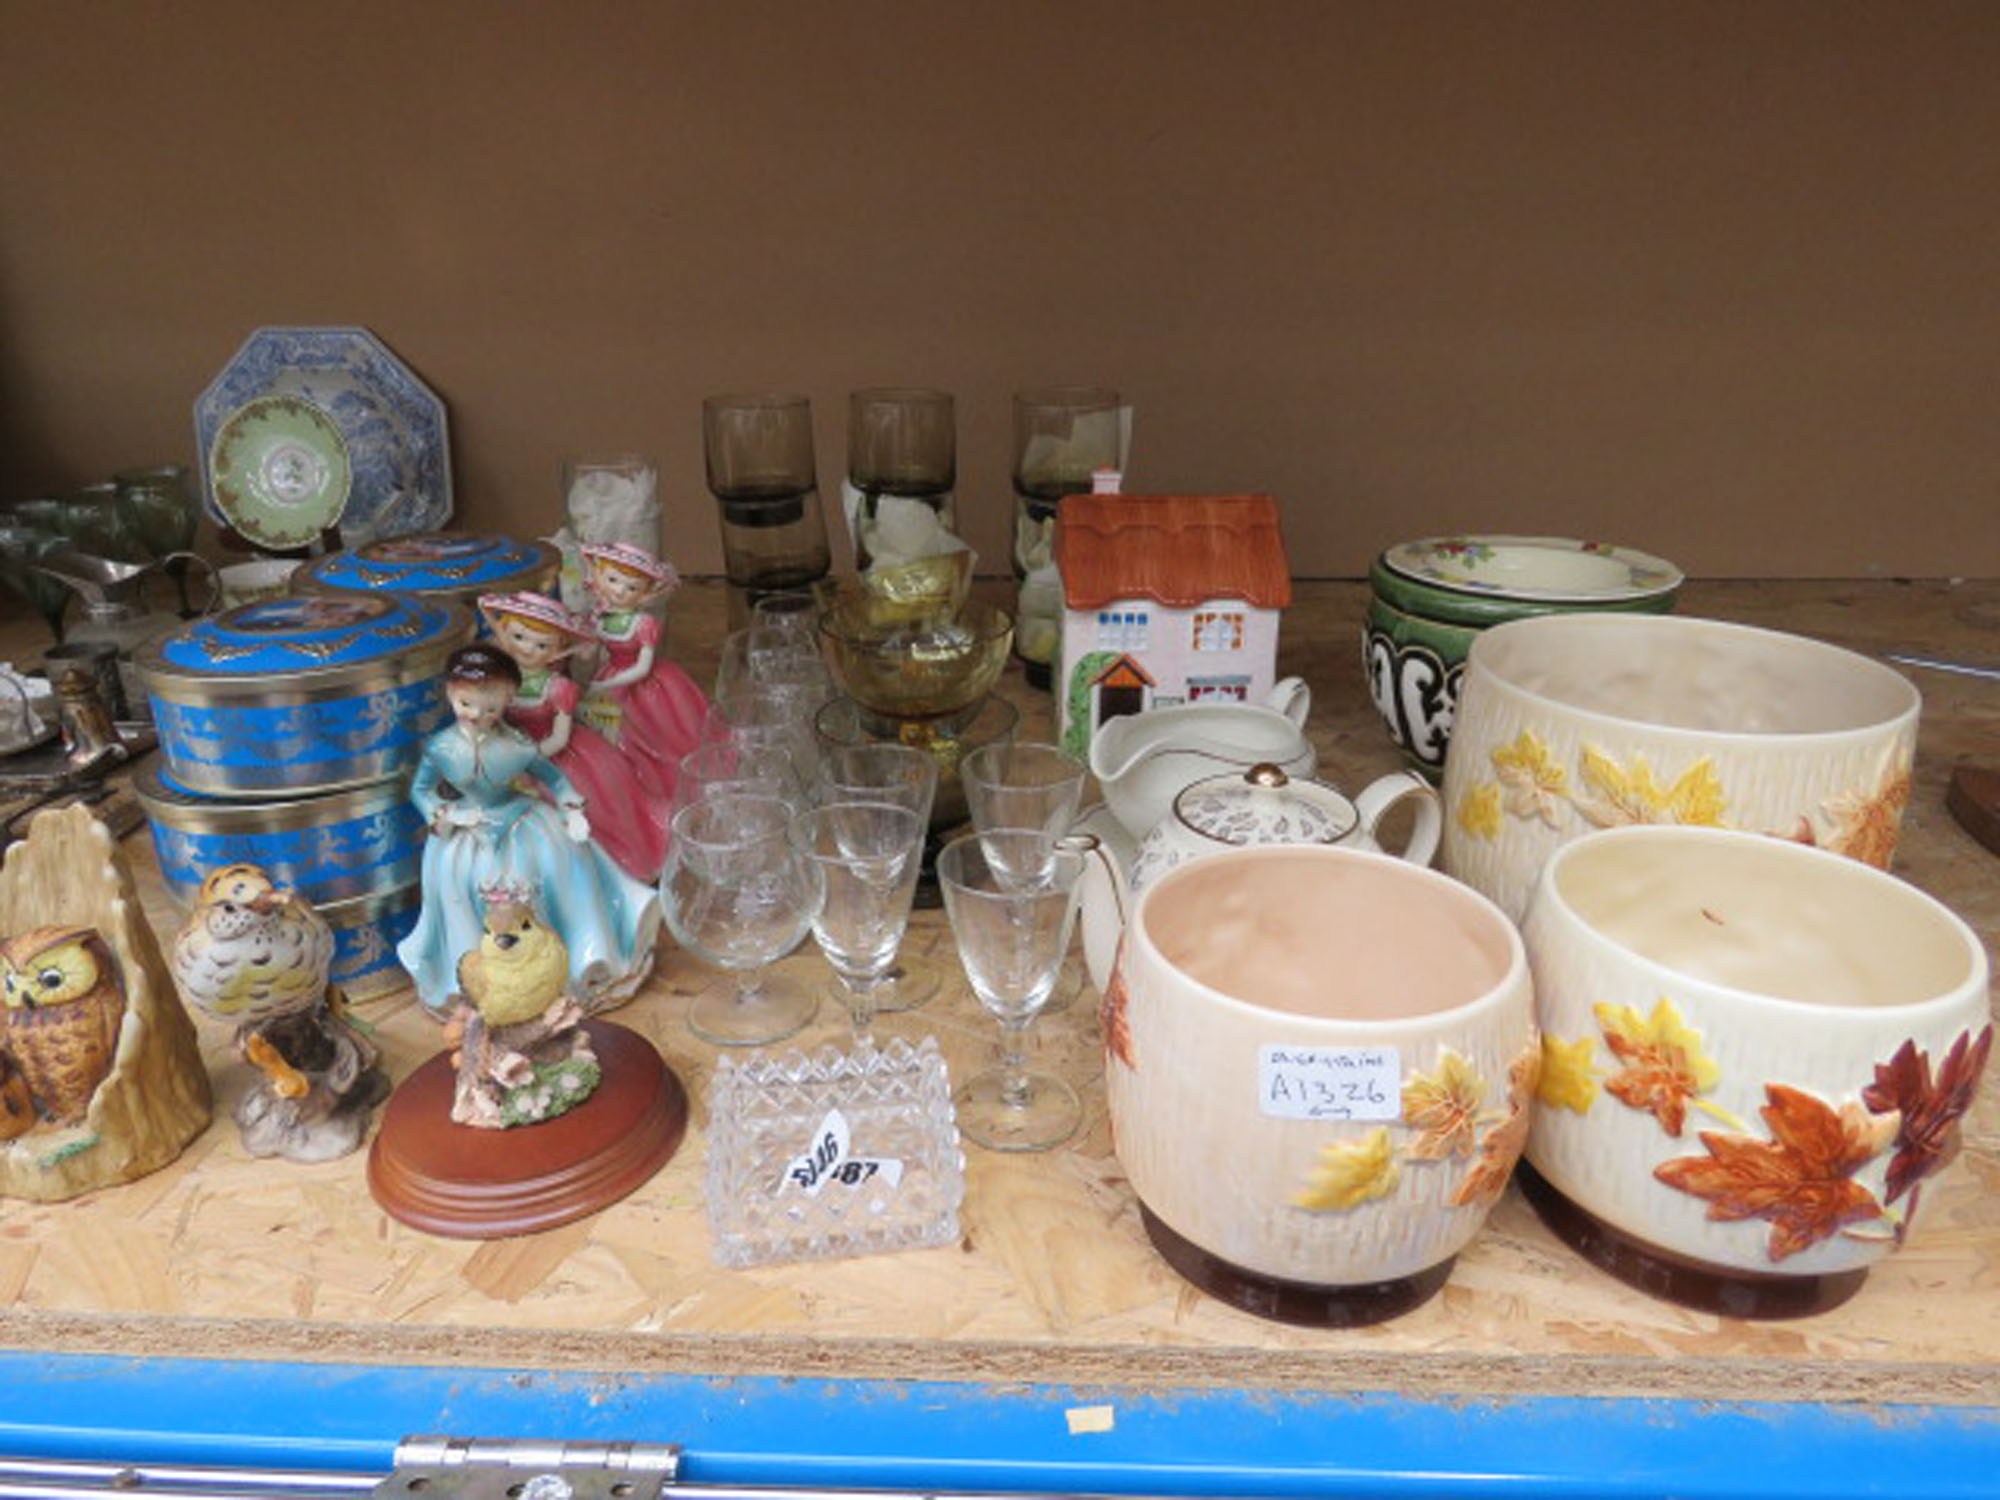 5387 Commemorative tins, ornamental birds, figures of ladies, tumblers and other glassware, milk